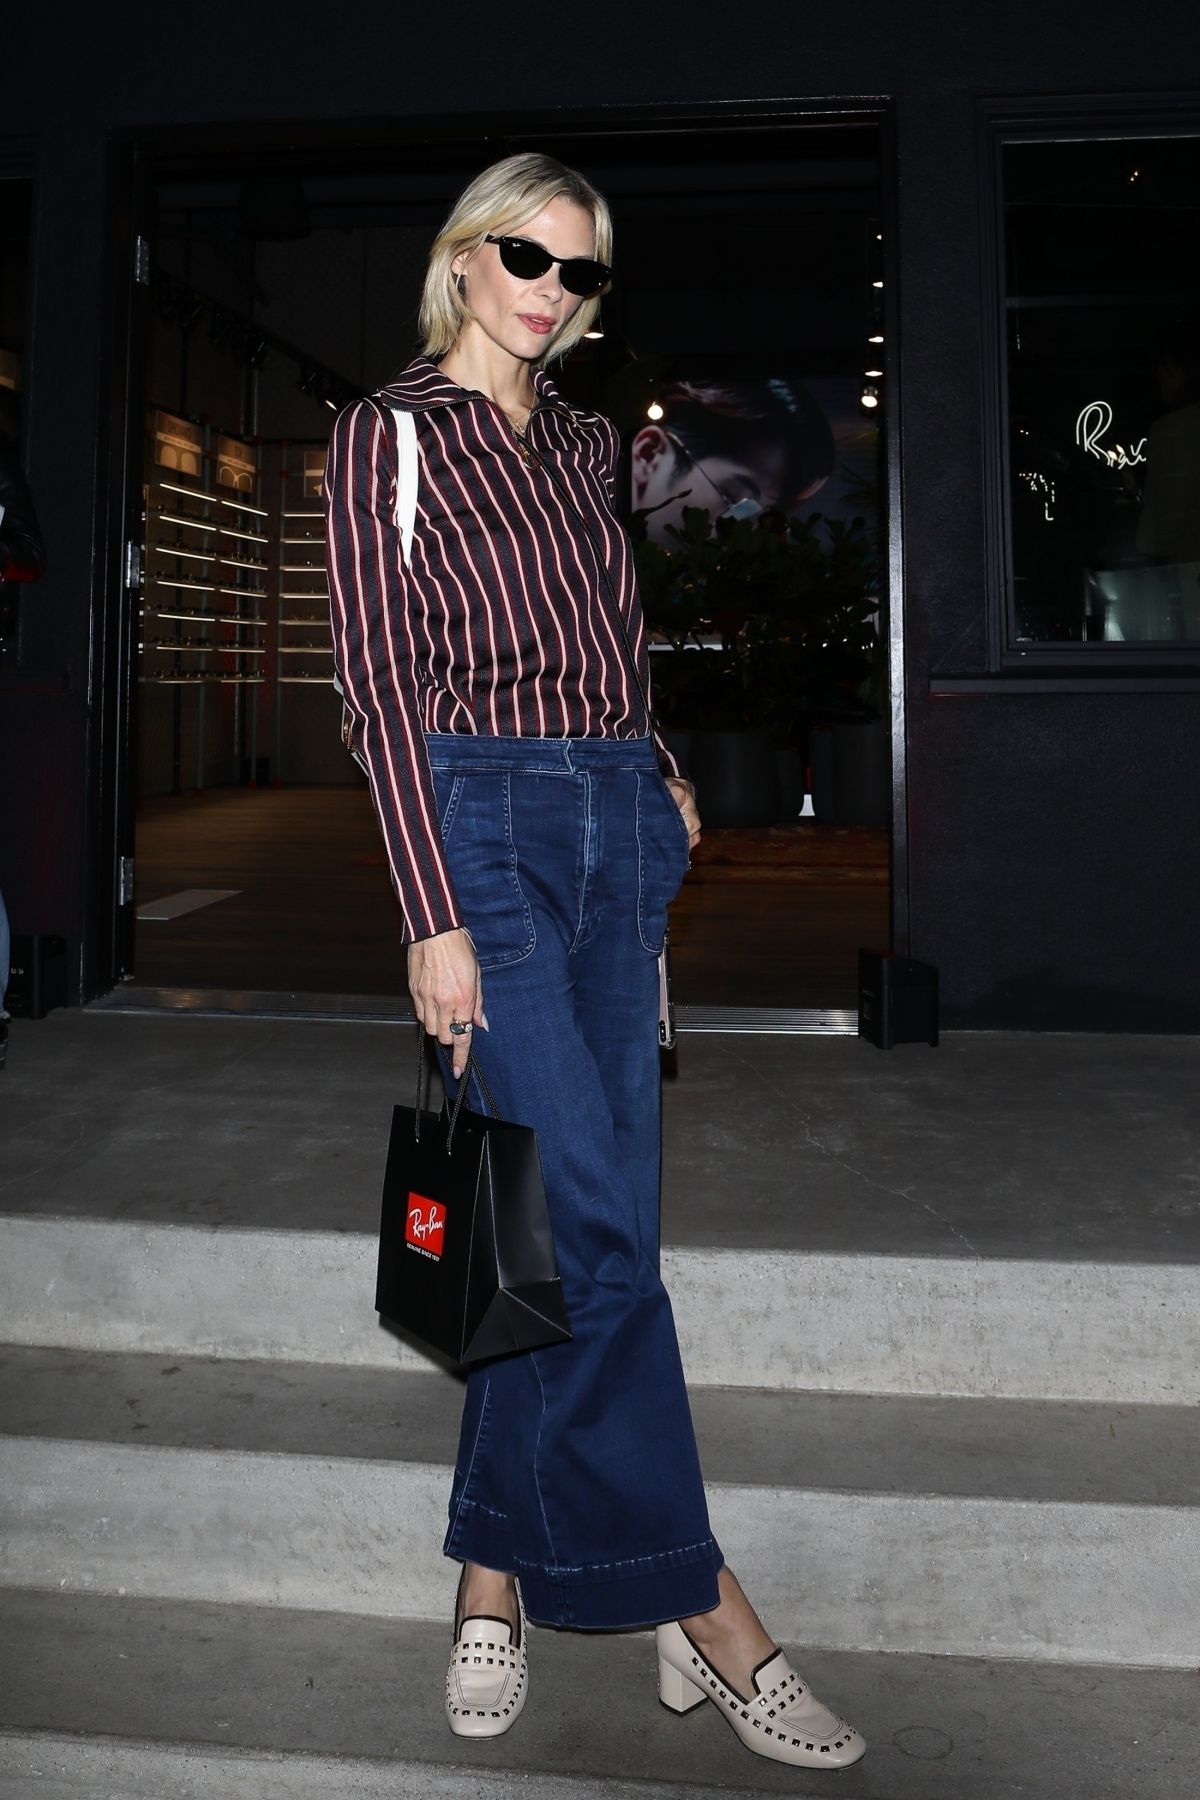 JAIME KING at Ray-ban Grand Opening in Venice Beach 11/07/2019 – HawtCelebs